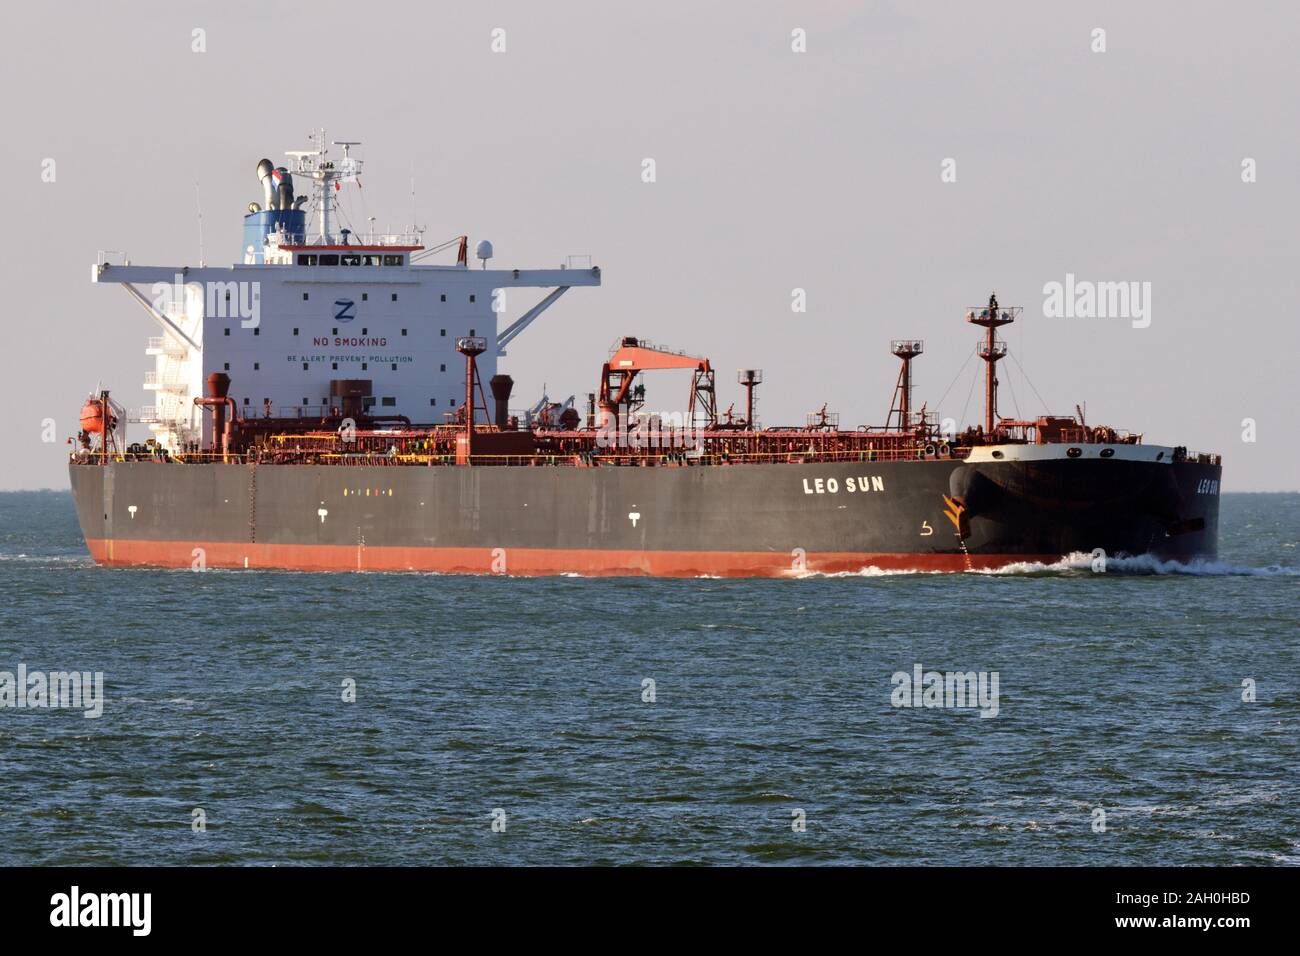 The crude oil tanker Leo Sun will reach the port of Rotterdam on October 30, 2019. Stock Photo